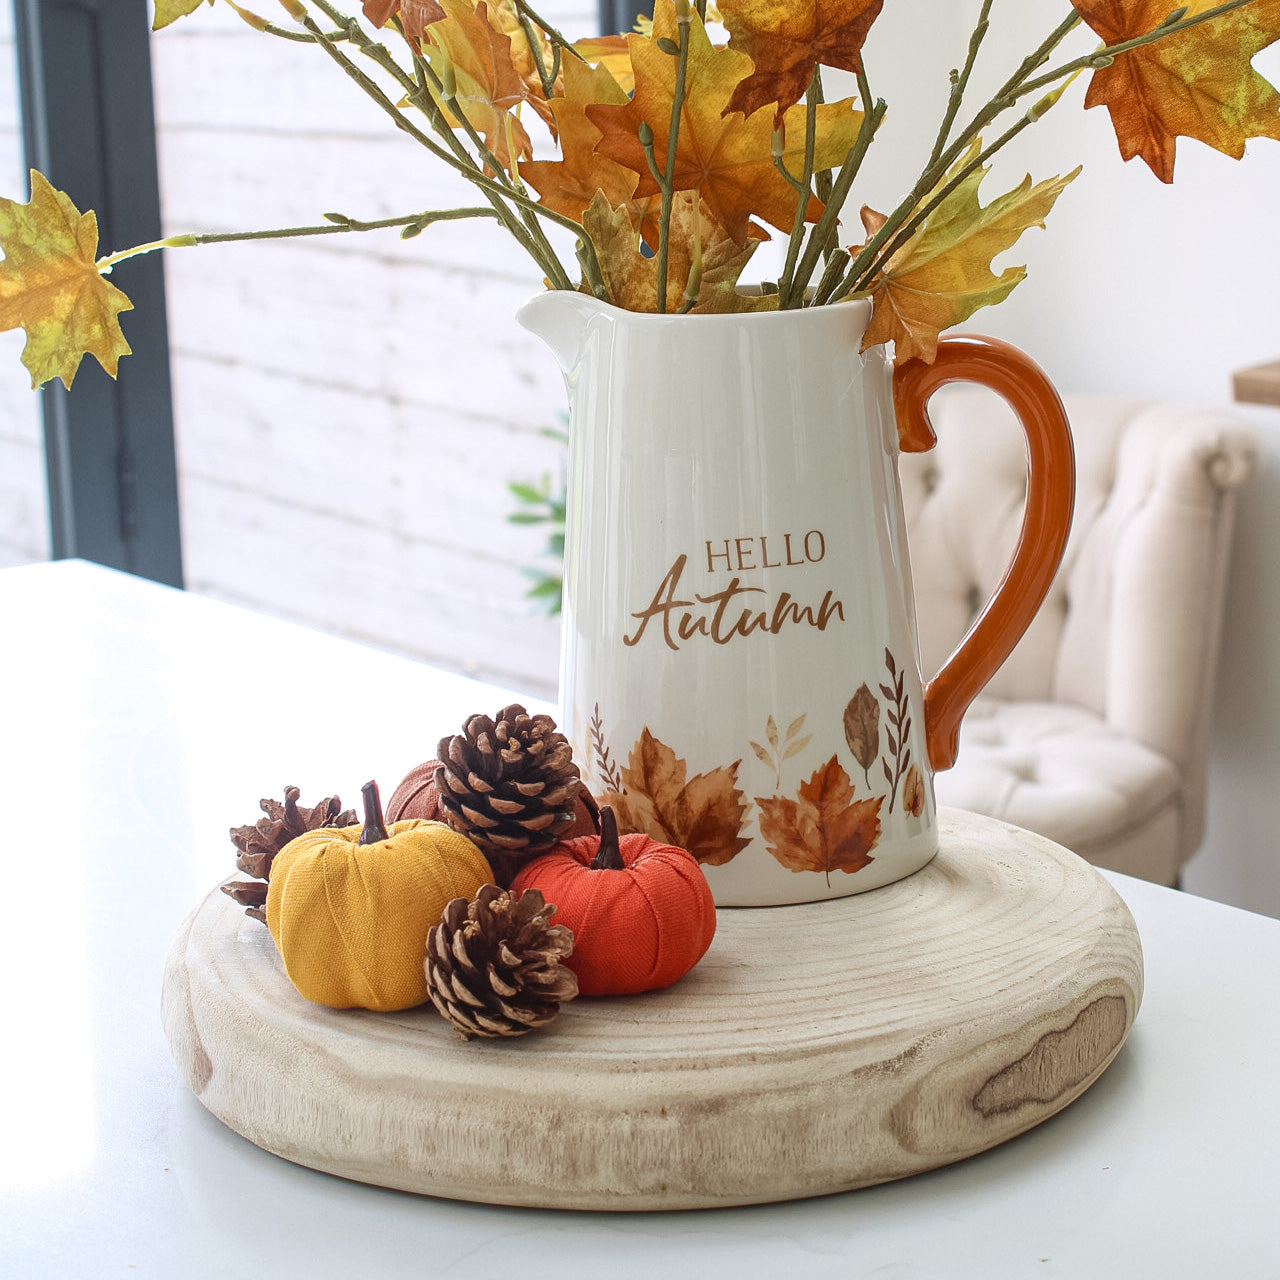 Embrace Autumn Decor Delights - Transitioning from Summer to Autumn